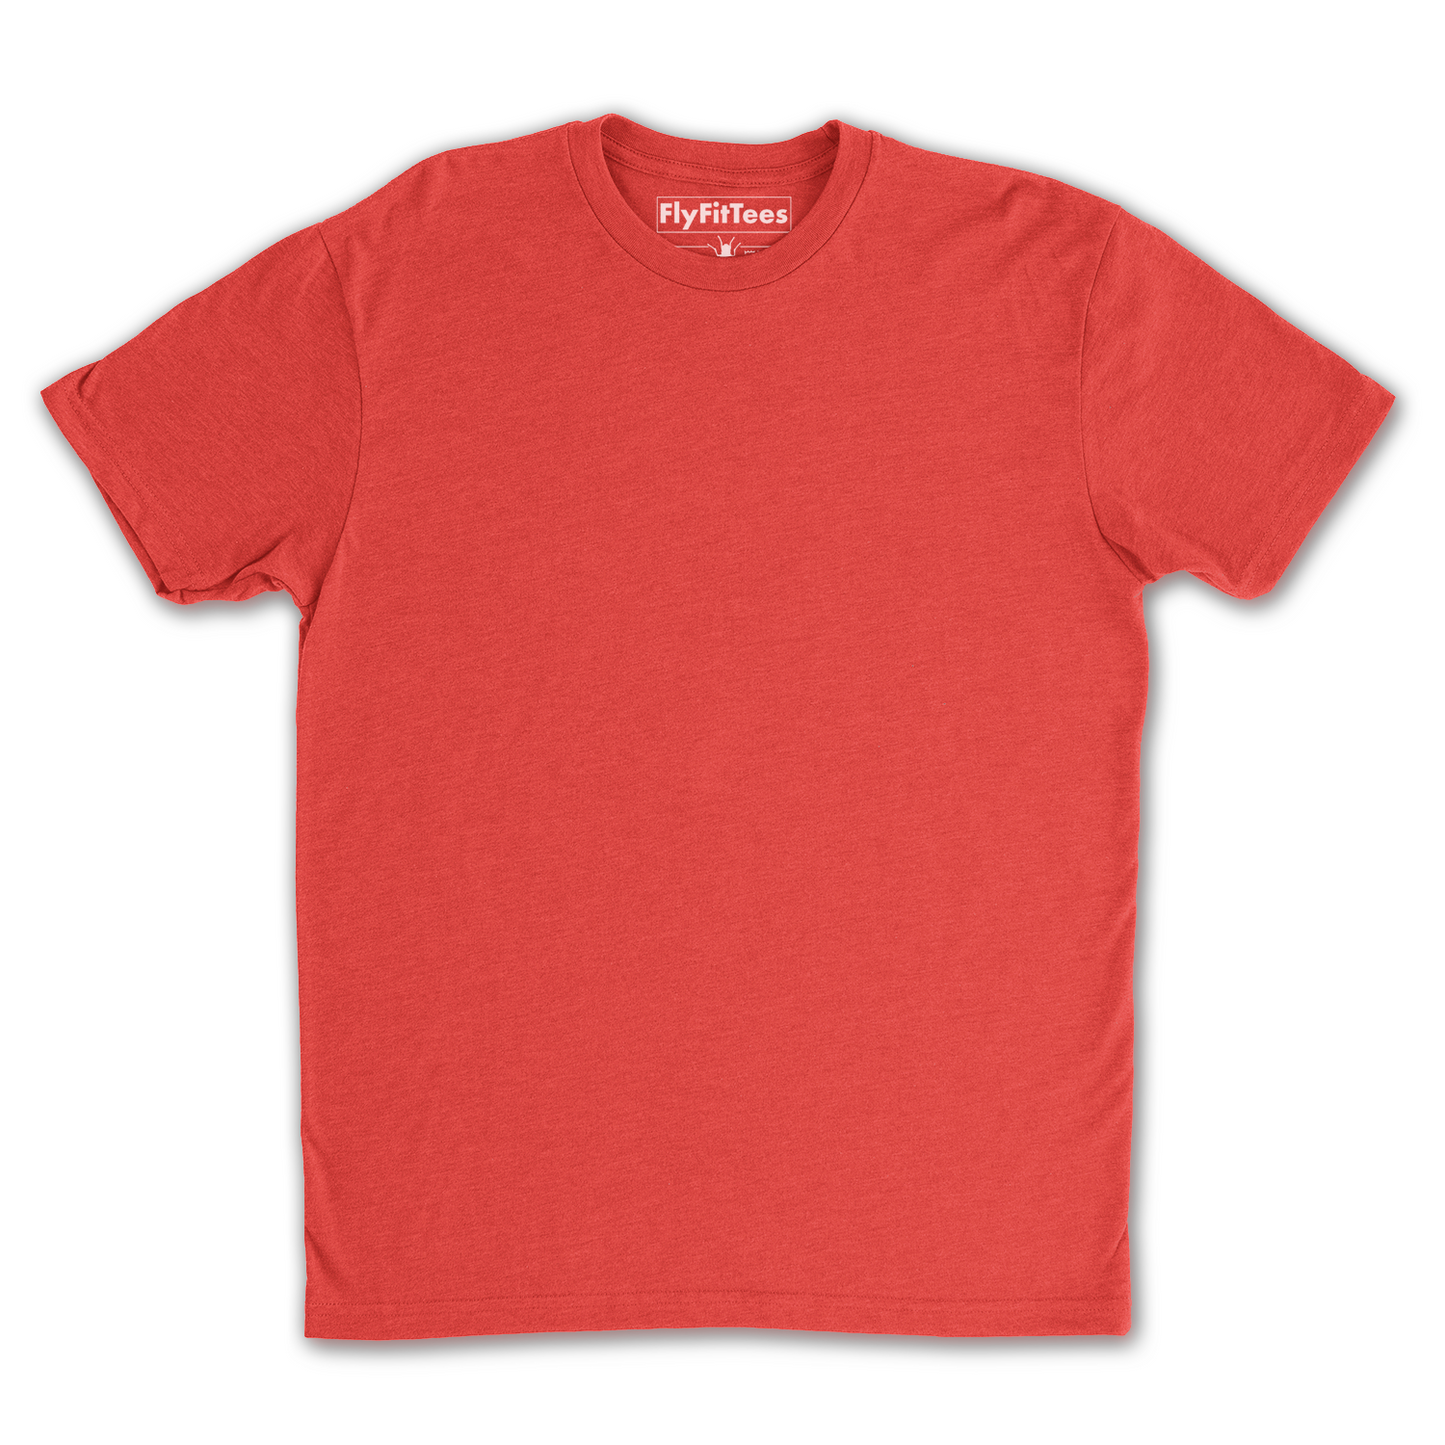 SoFly Original Perfect Fit Tee - 3 Pack - Red and friends